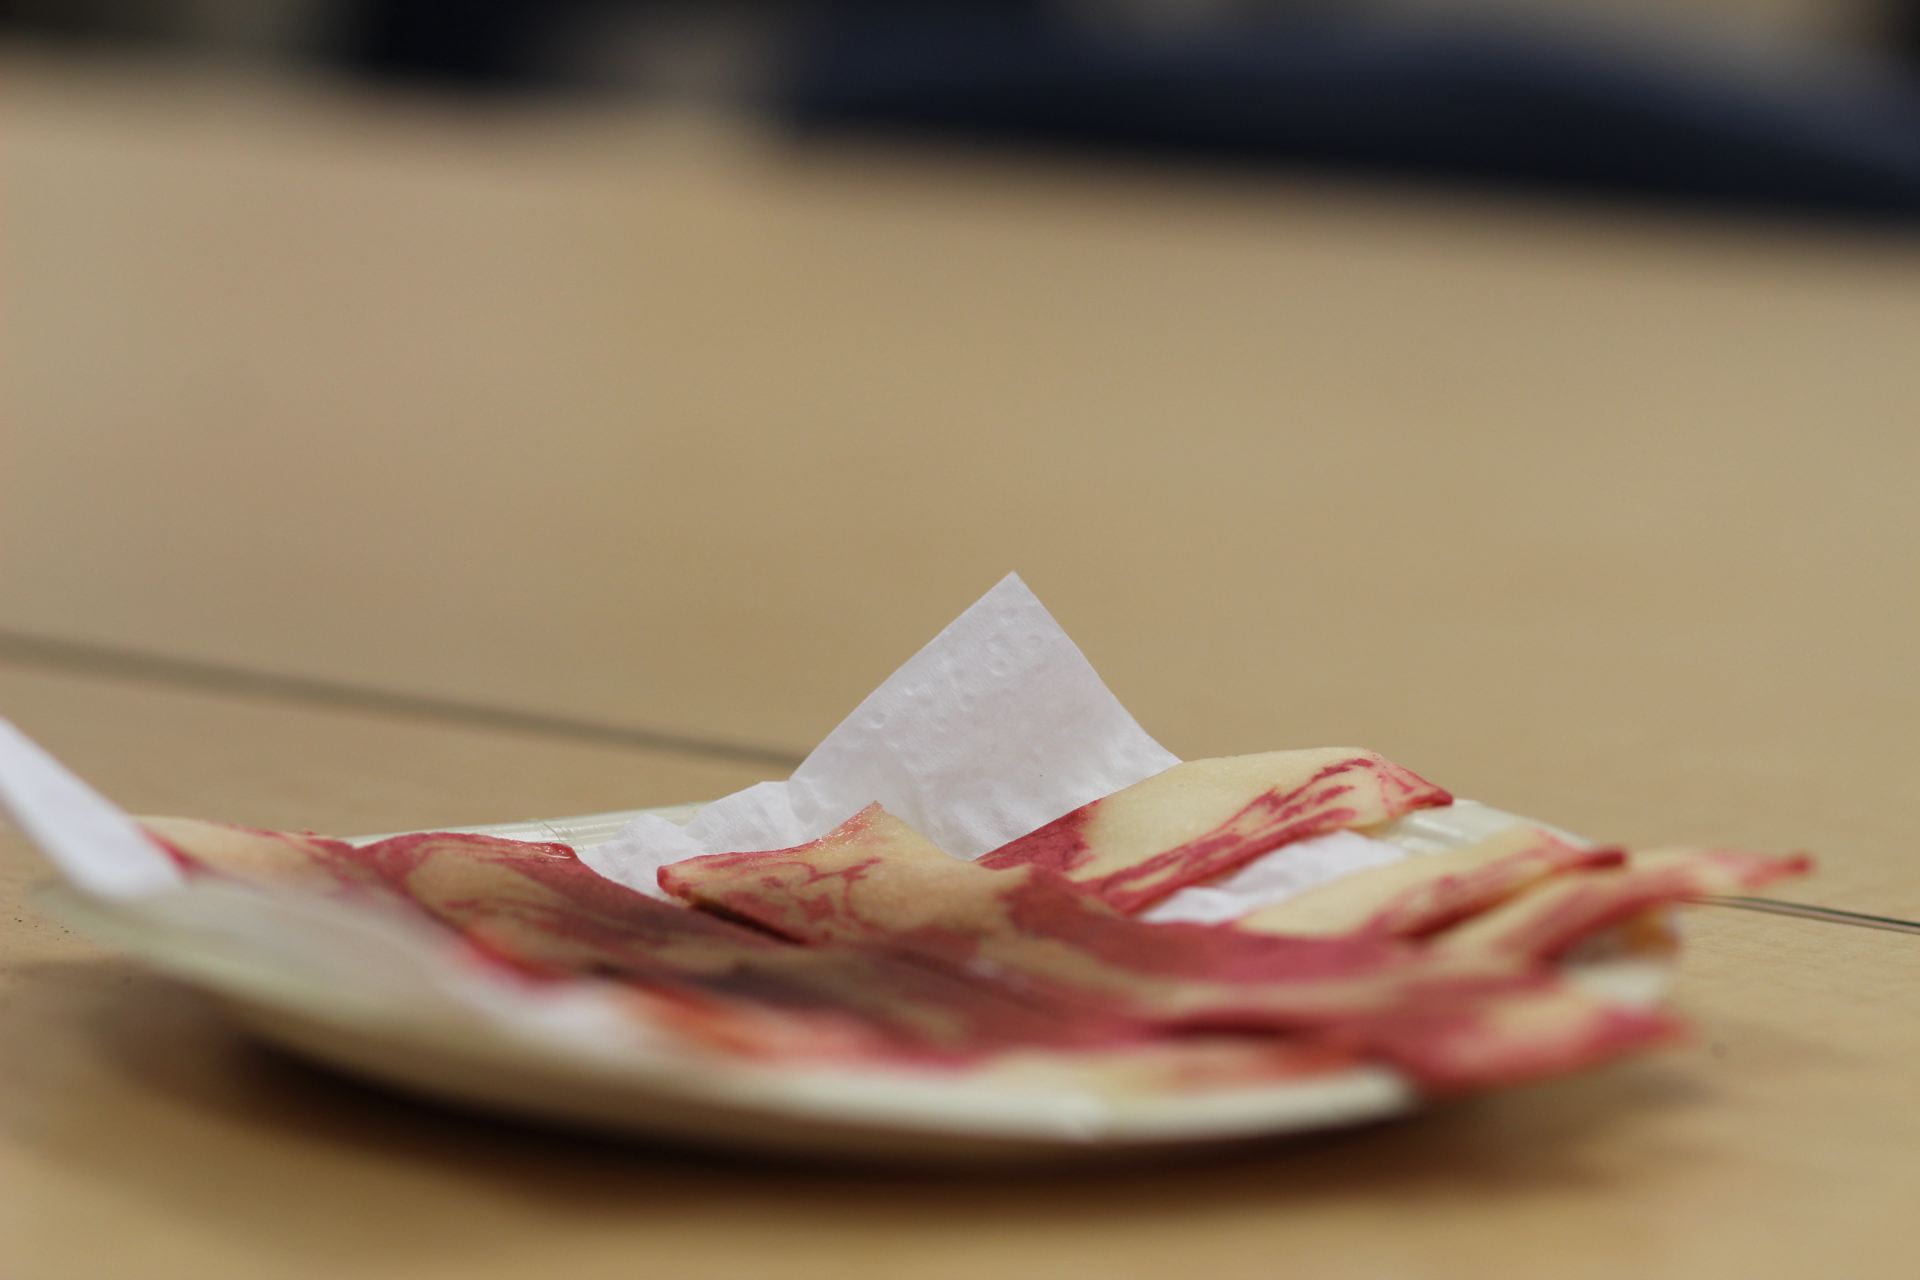 A plate of vegan bacon sits on a plate with a soft, blurred background